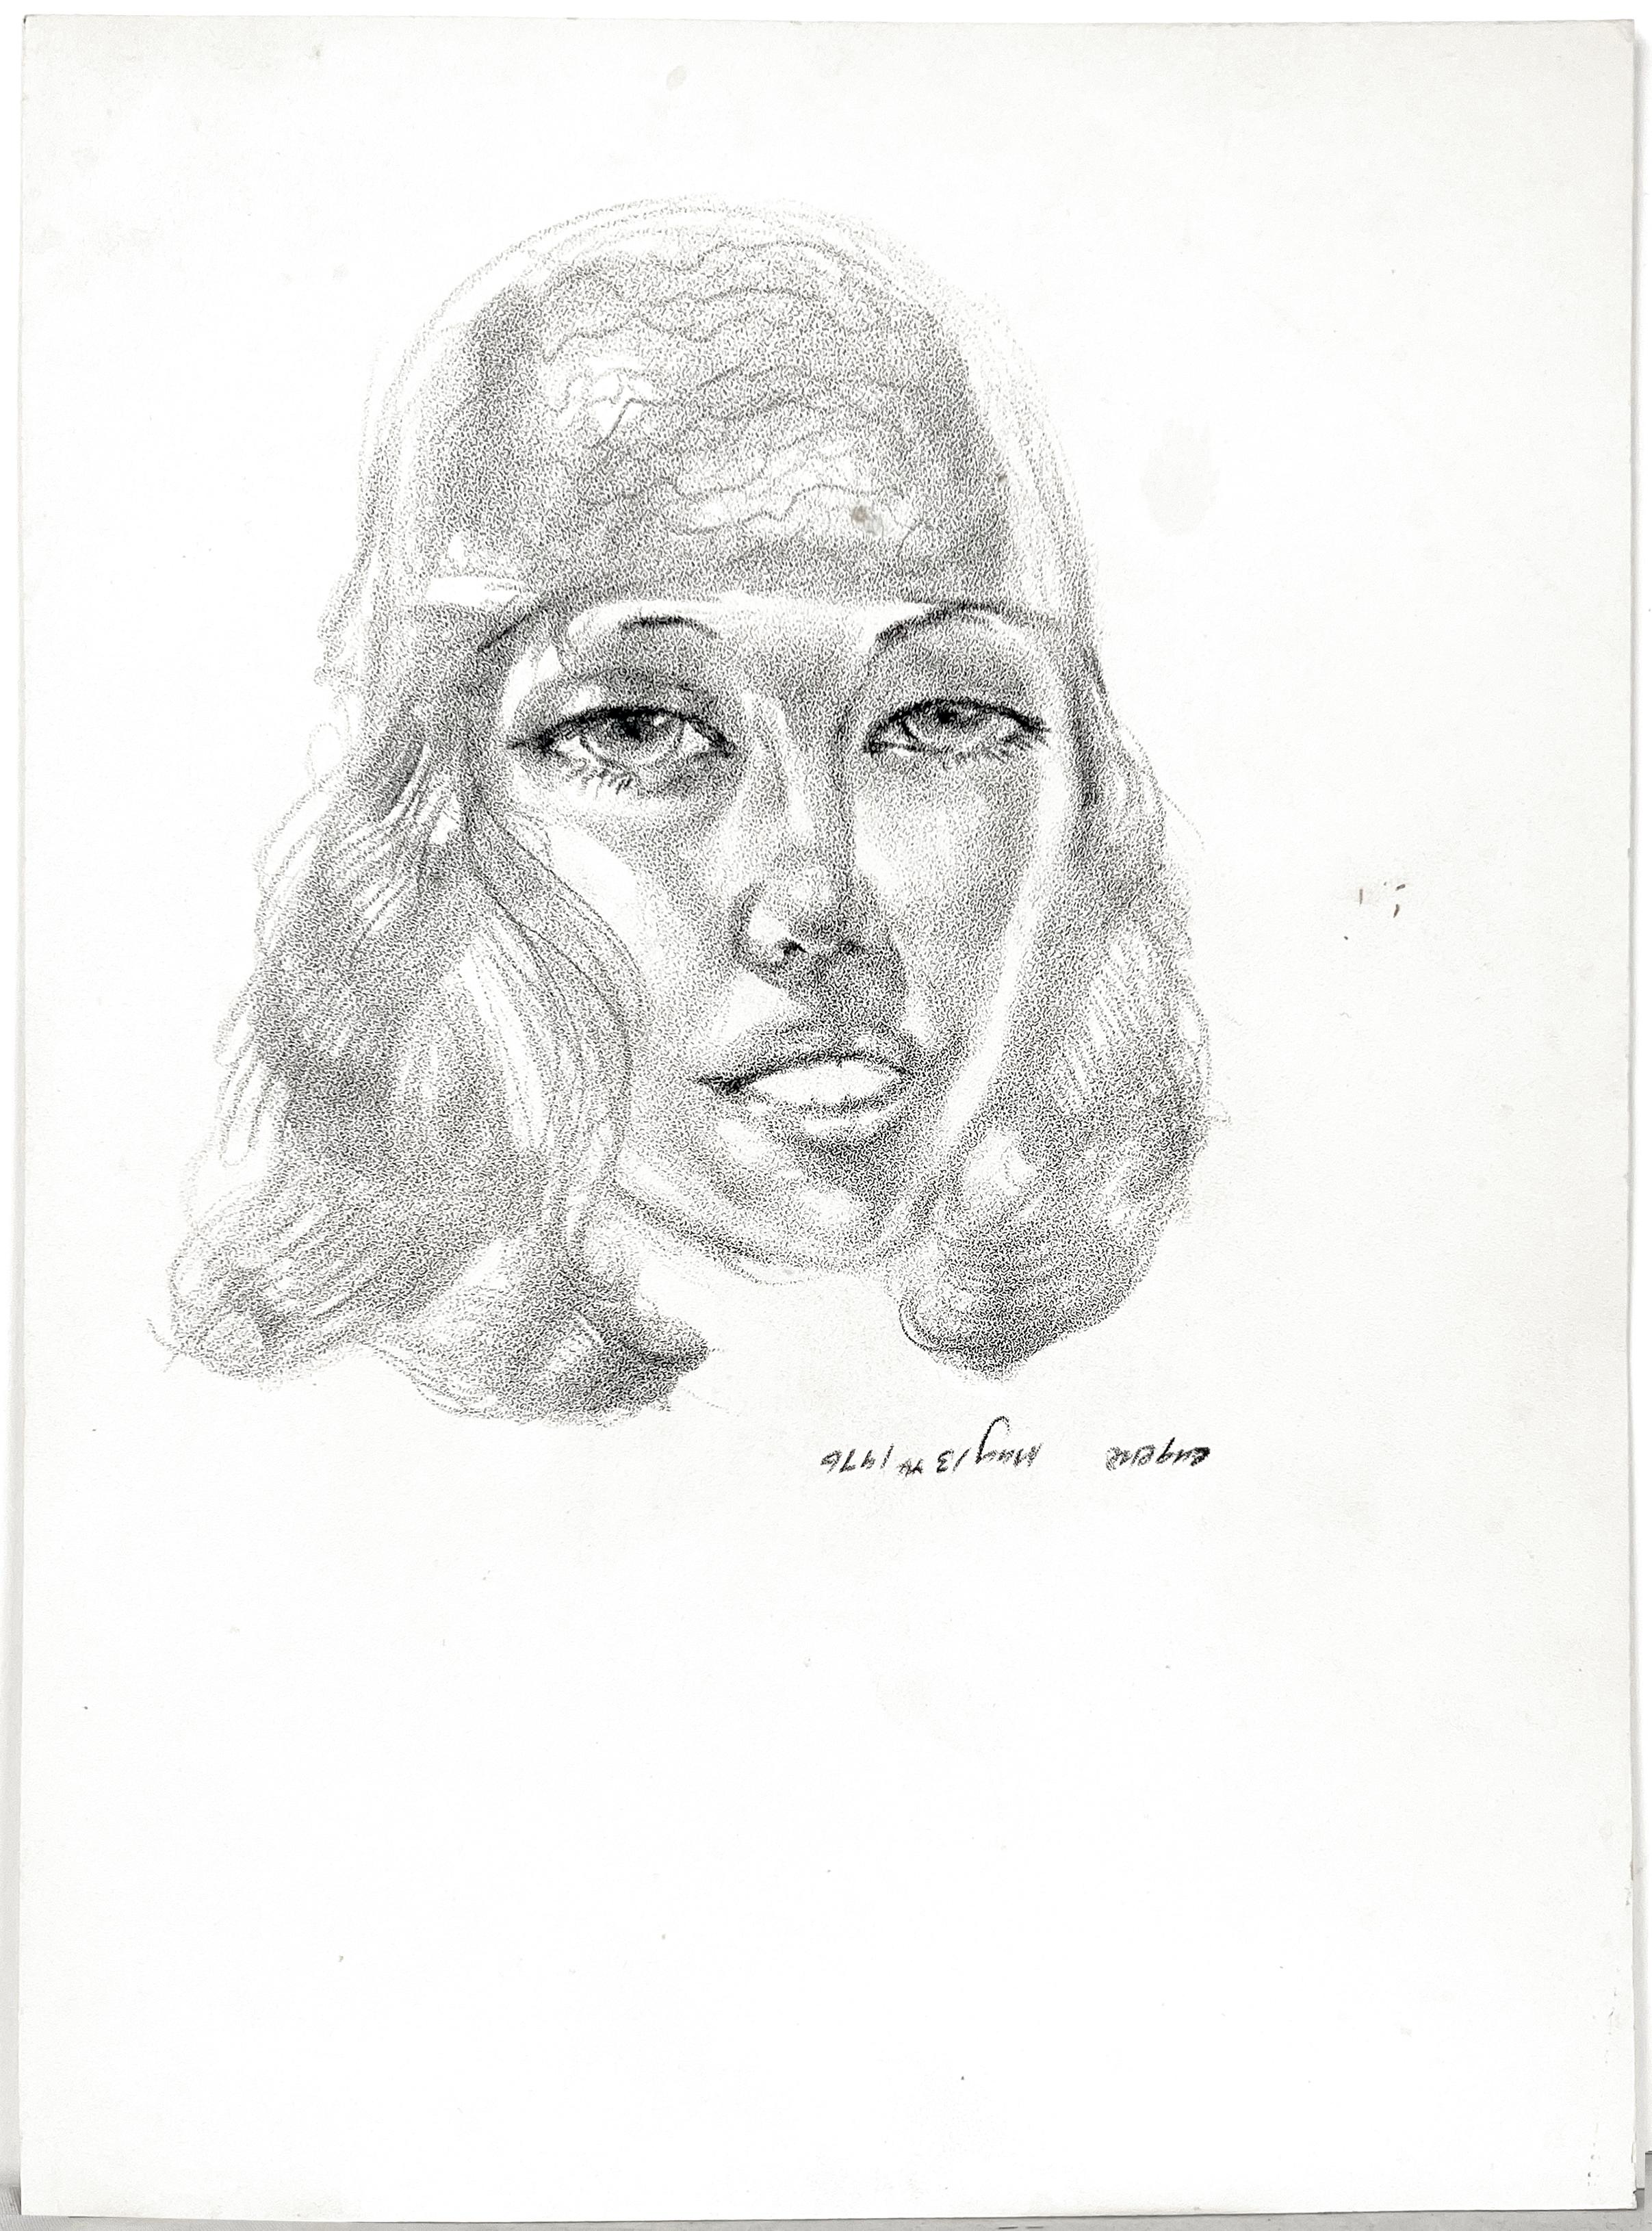 Bohemian Woman - Rare and Signed Graphite Portrait Drawing on Textured Paper - Print by Eugene Hawkins